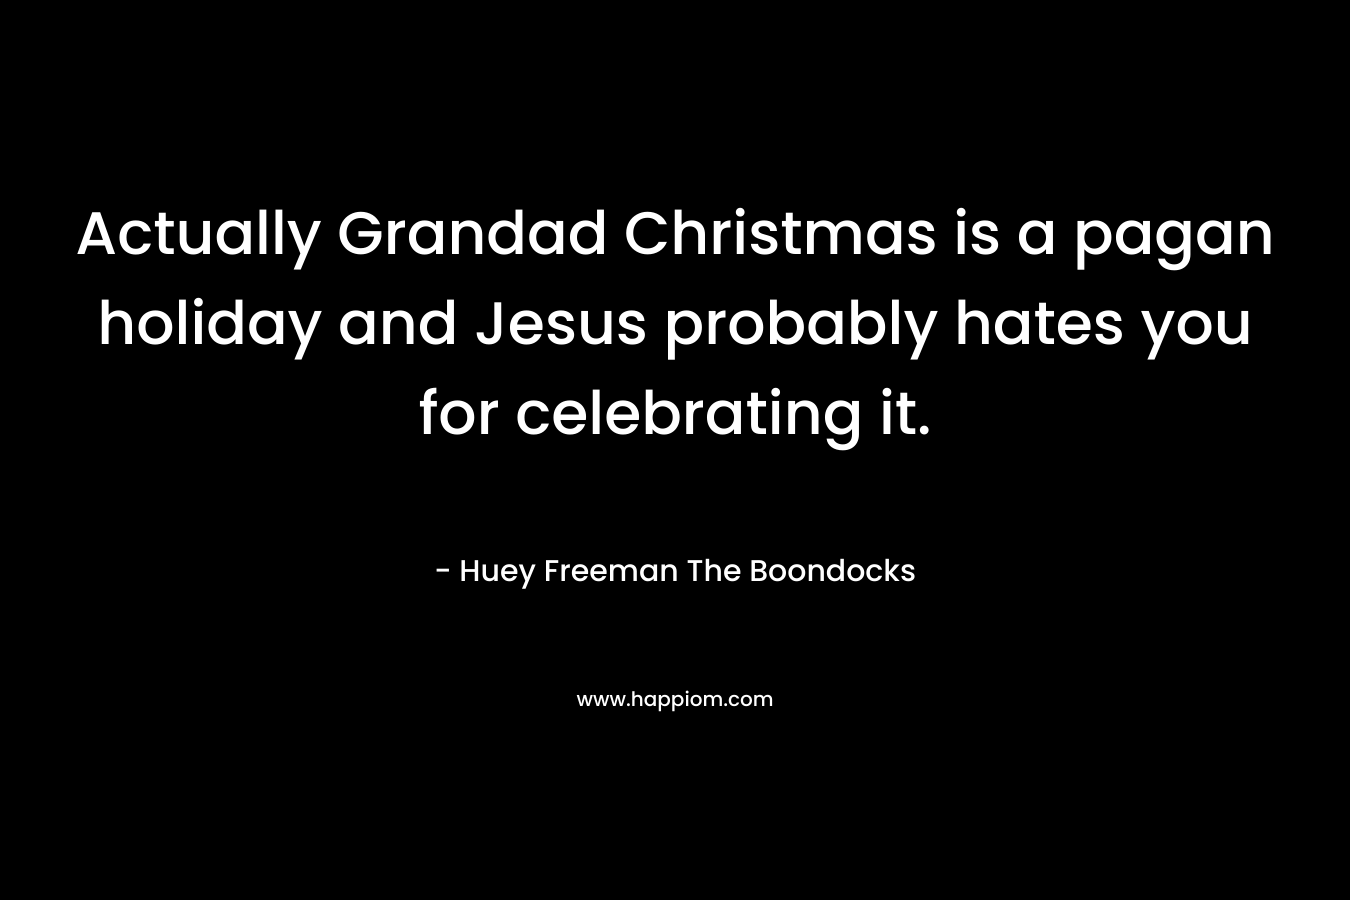 Actually Grandad Christmas is a pagan holiday and Jesus probably hates you for celebrating it. – Huey Freeman The Boondocks